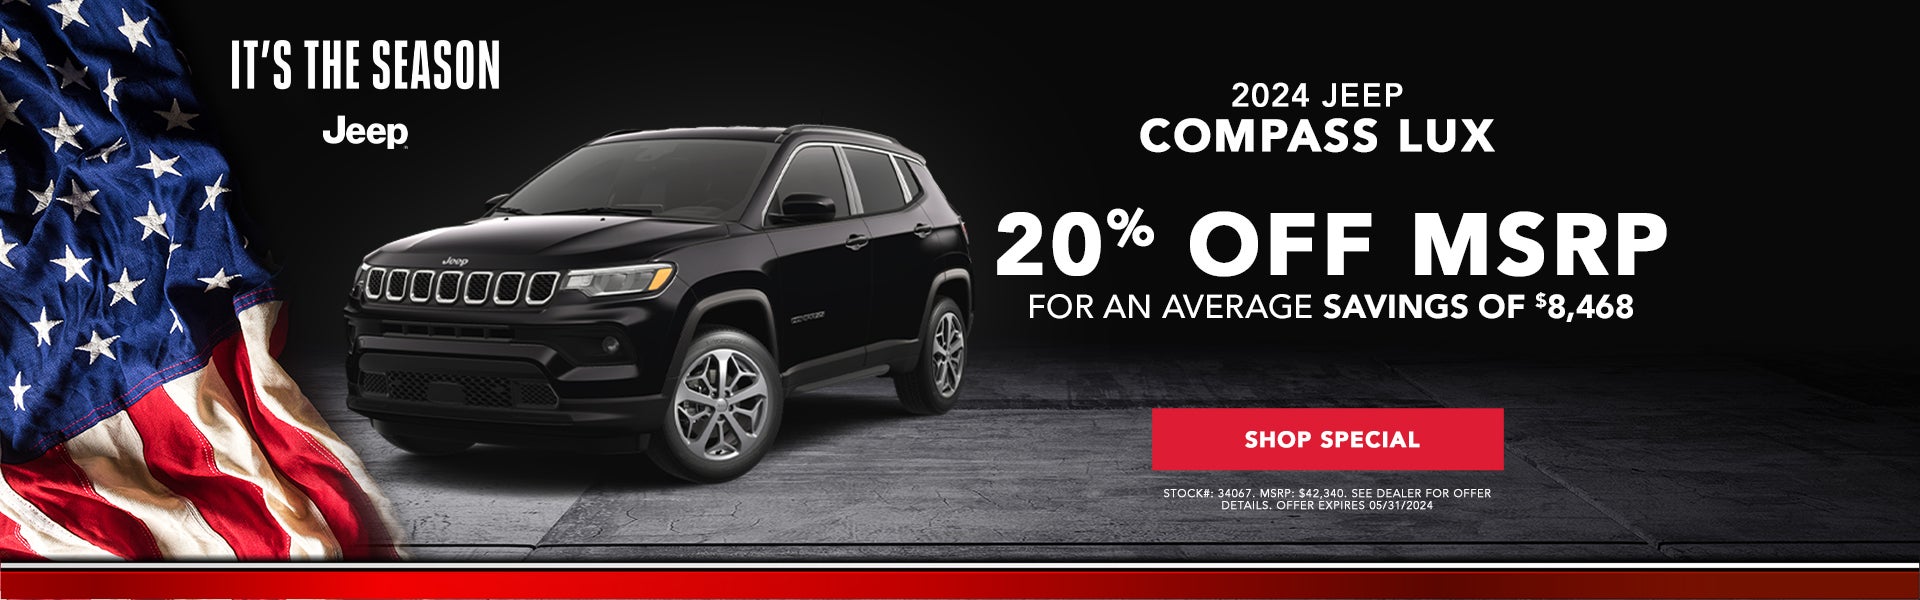 Get 20% Off MSRP for an averaging of $8,468